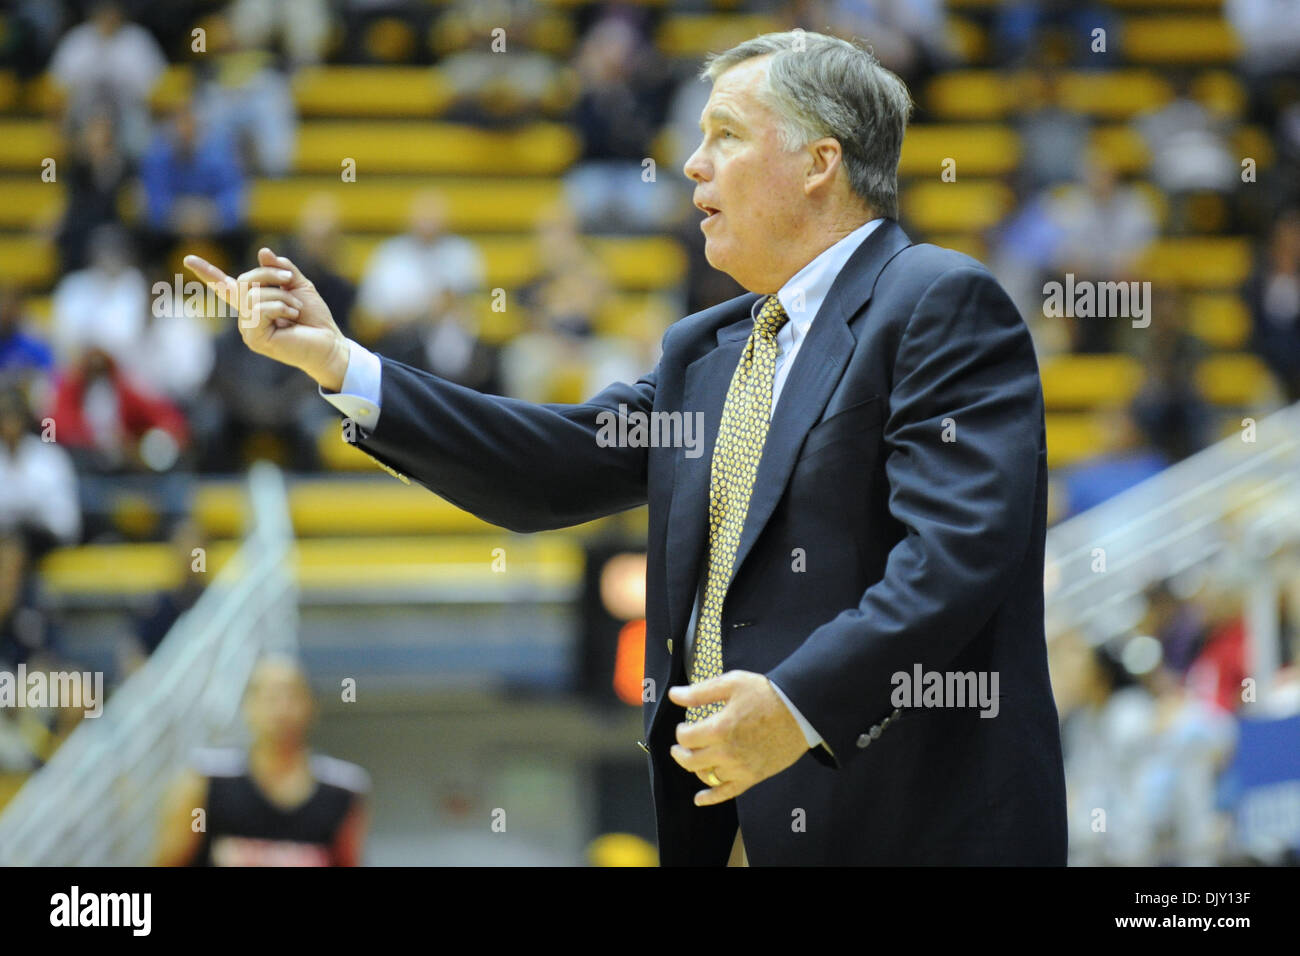 Nov. 16, 2010 - Berkeley, California, United States of America - Cal head coach Mike Montgomery directs his players during the NCAA game between the California Golden Bears and the Cal State Northridge Matadors at Haas Pavilion.  California pulled away in the second half and won 80-63. (Credit Image: © Matt Cohen/Southcreek Global/ZUMApress.com) Stock Photo